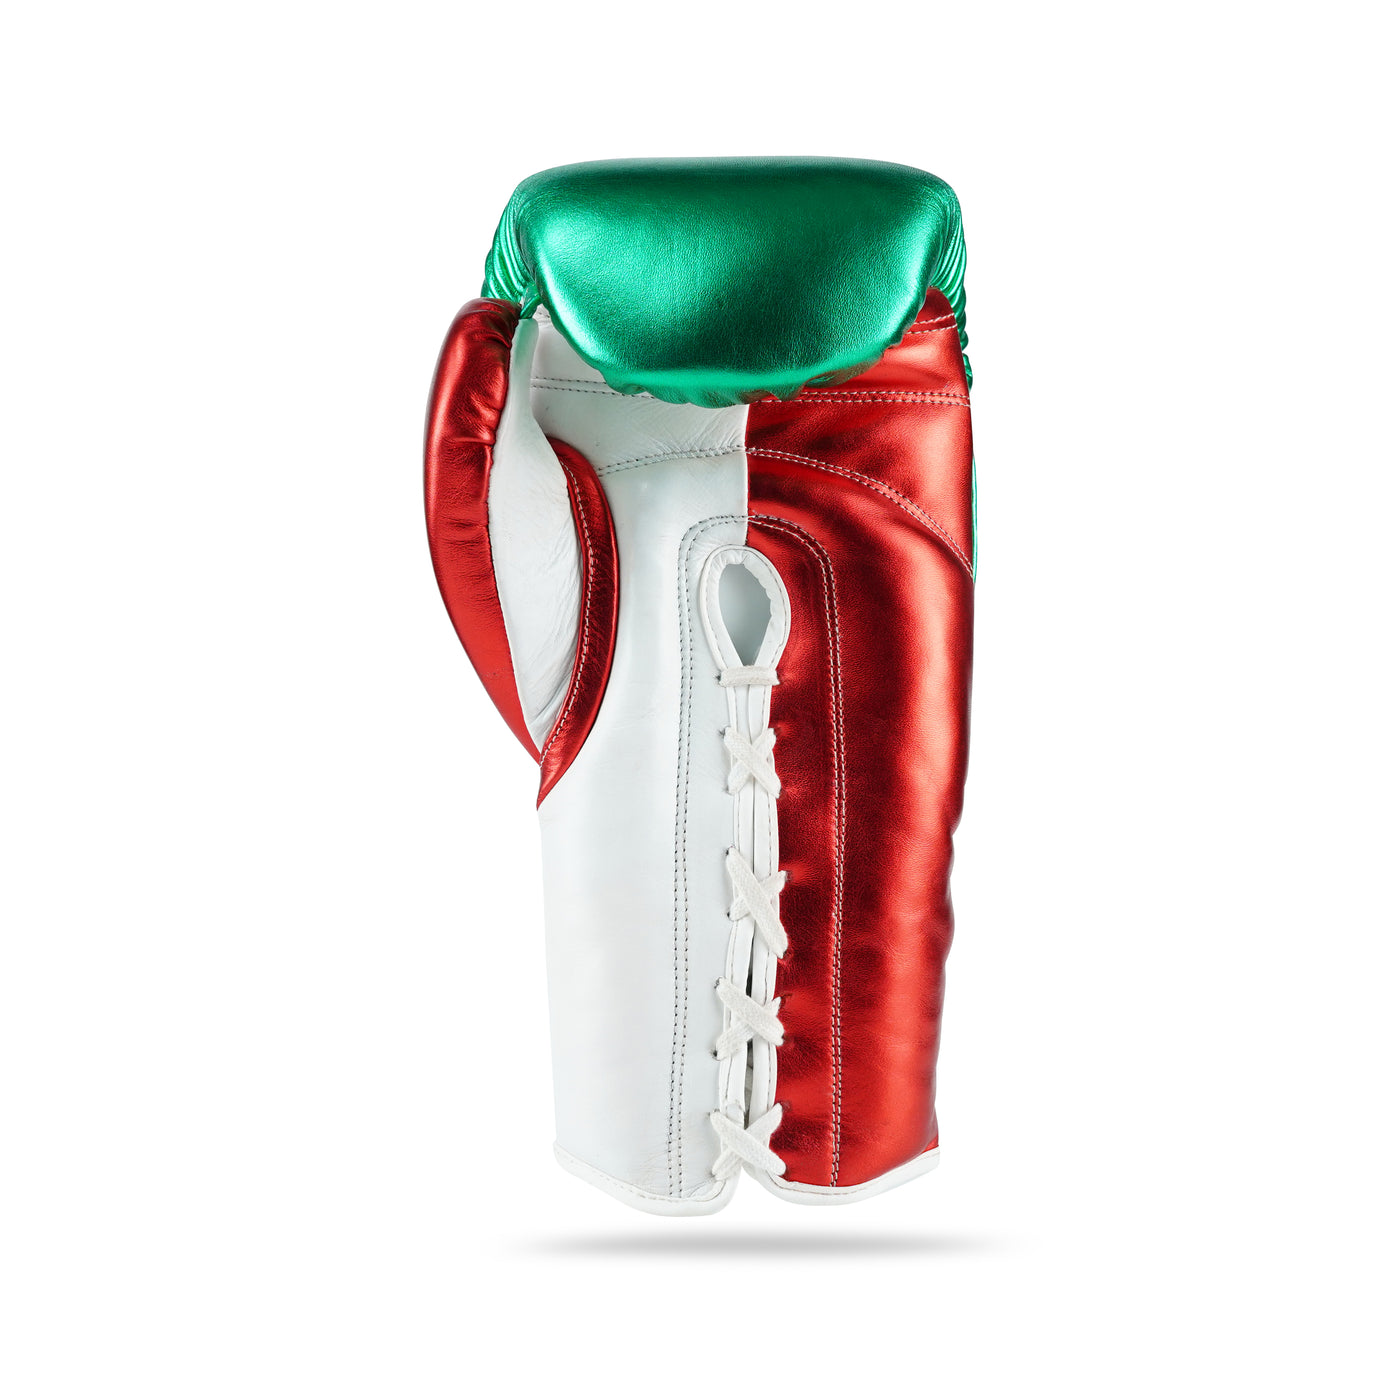 WYRM Deluxe Red/Green Pro Boxing Genuine Leather Gloves